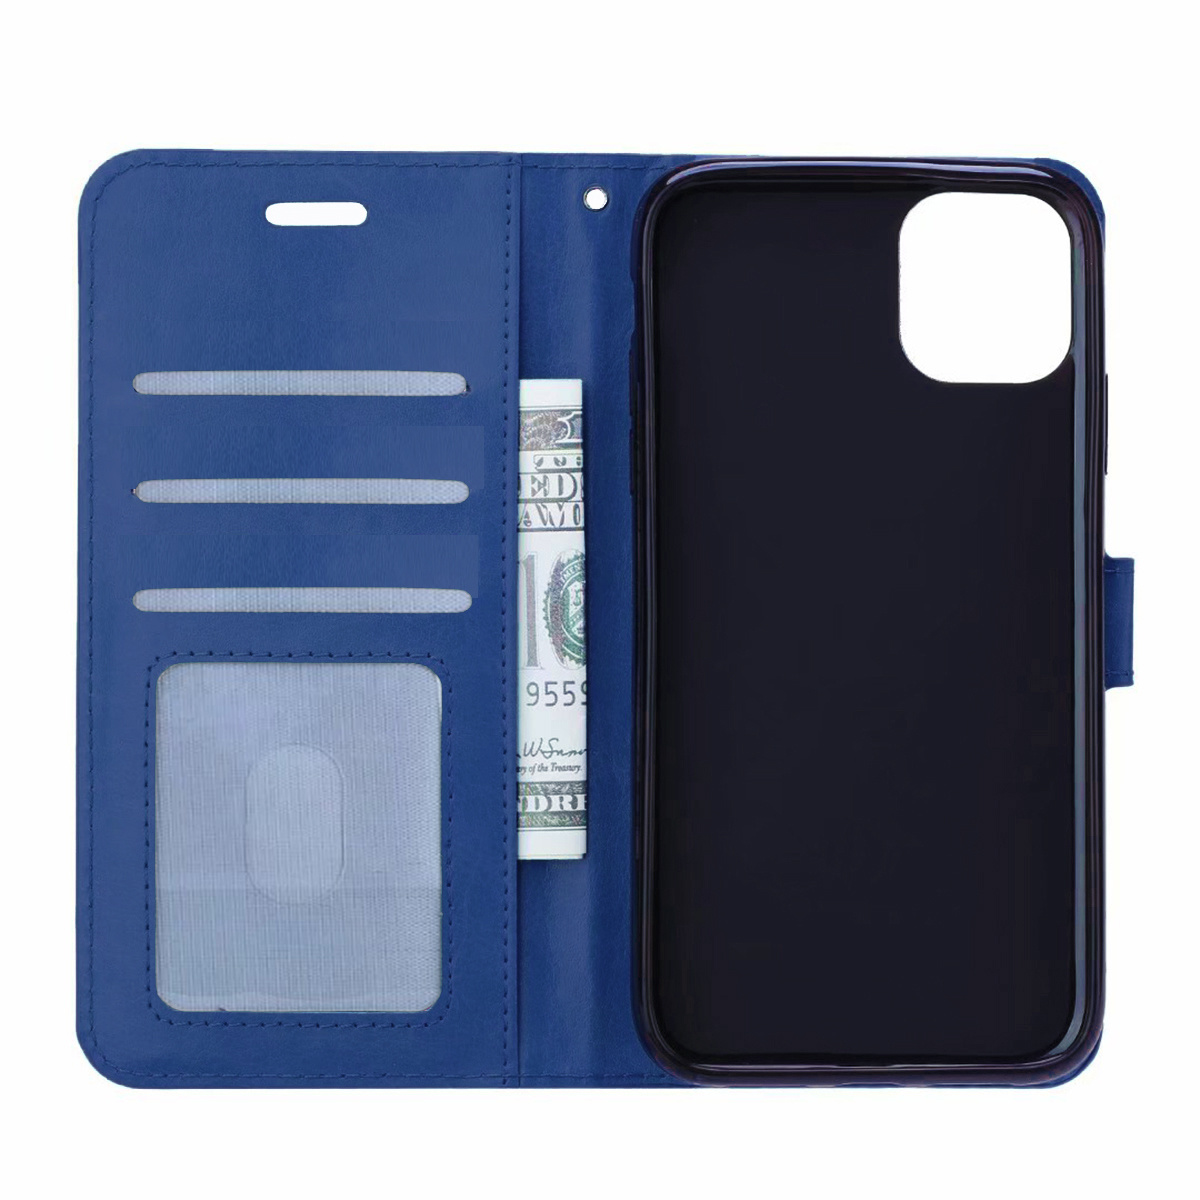 Nomfy Hoes voor iPhone 11 Hoes Bookcase Flipcase Book Cover - Hoes voor iPhone 11 Hoesje Book Case - Donker Blauw